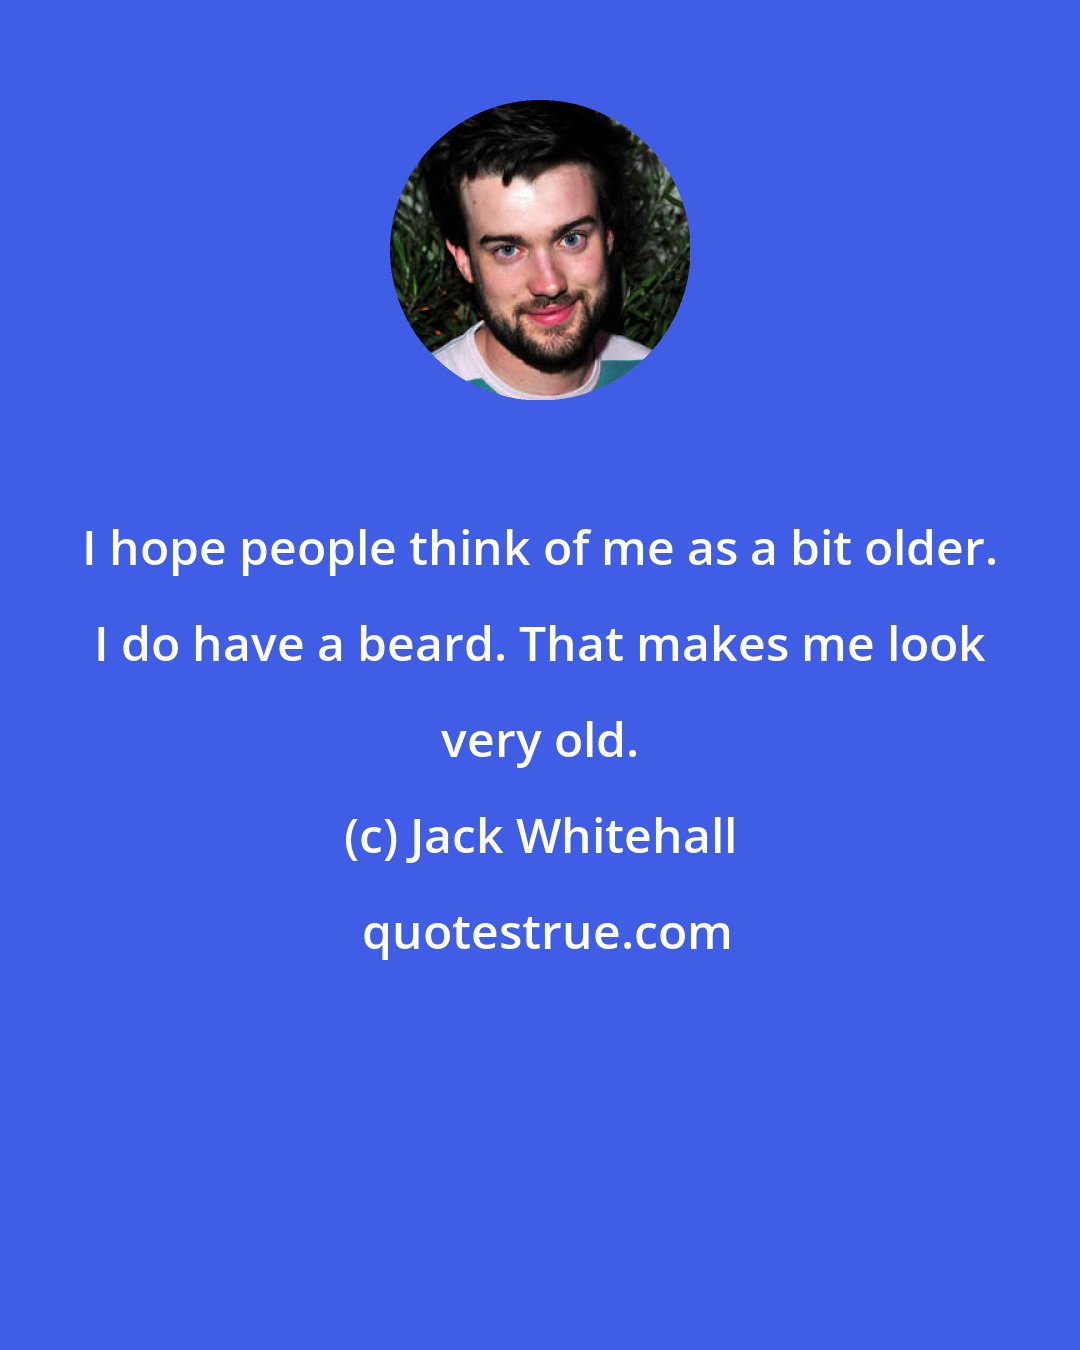 Jack Whitehall: I hope people think of me as a bit older. I do have a beard. That makes me look very old.